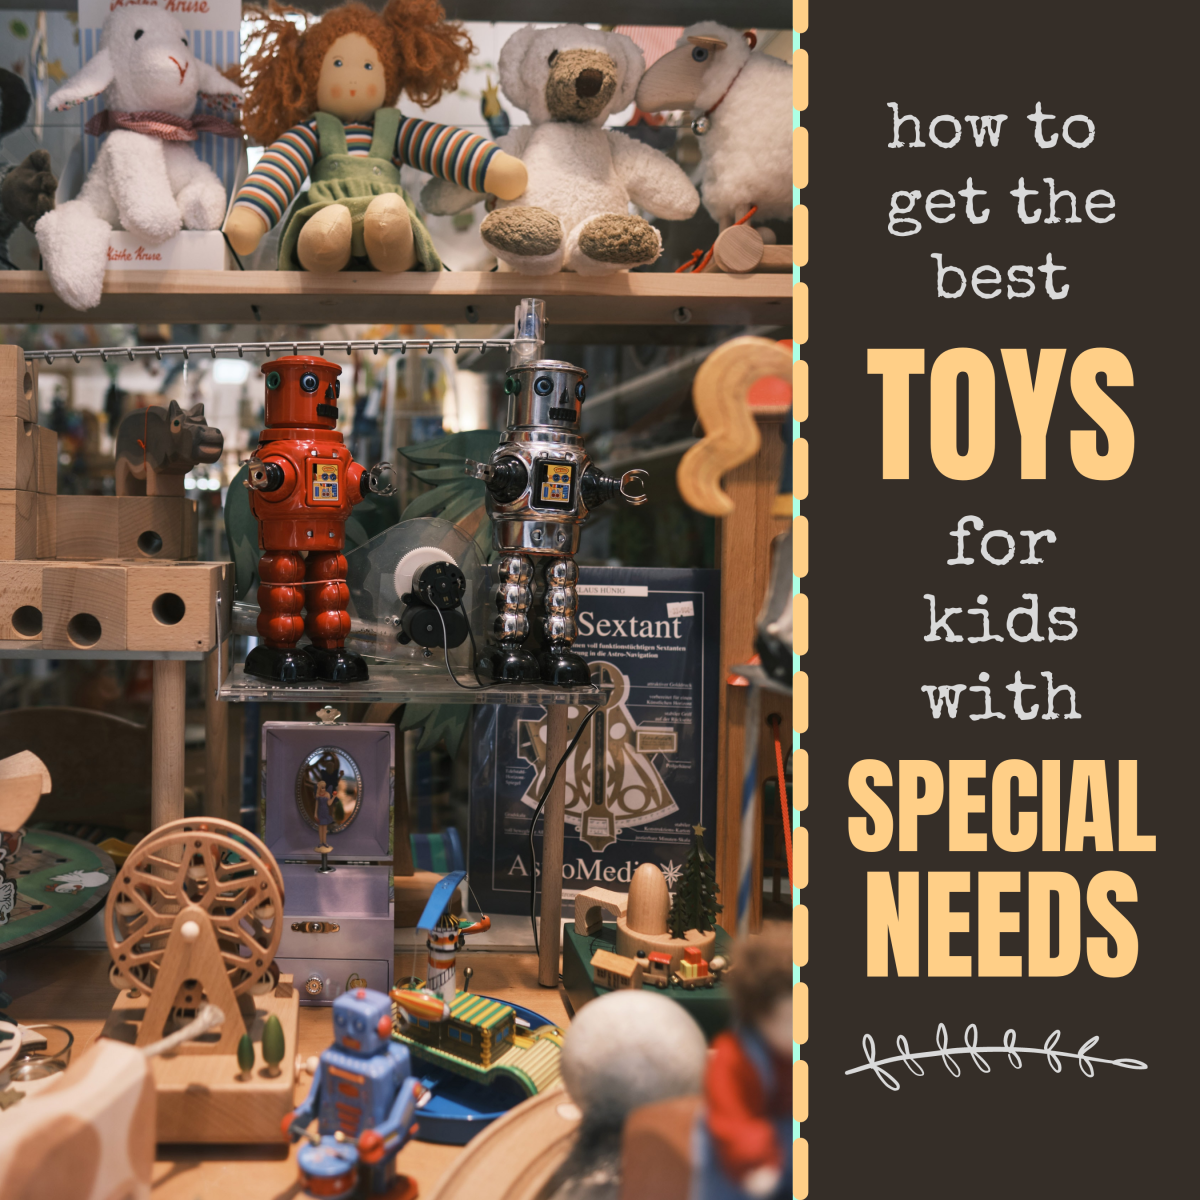 Finding Adaptive Toys for Special Needs Children